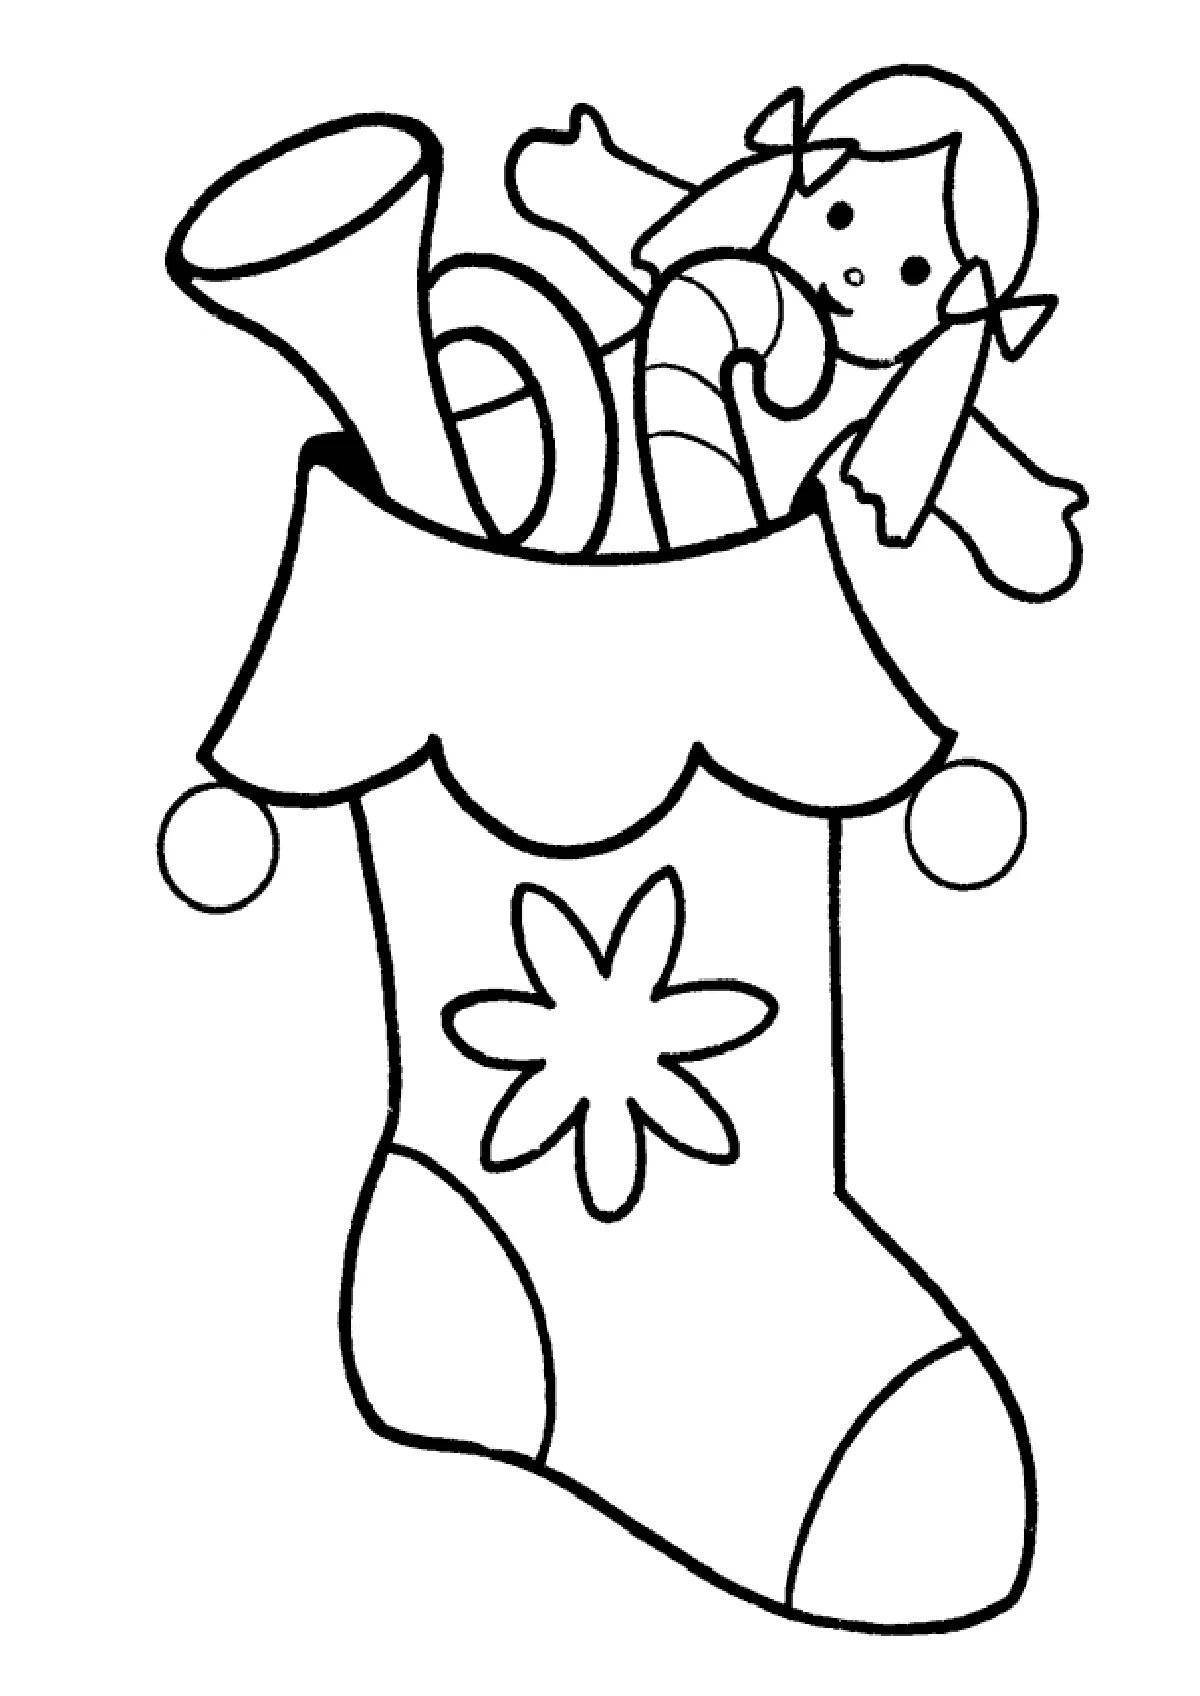 Bright stocking coloring page